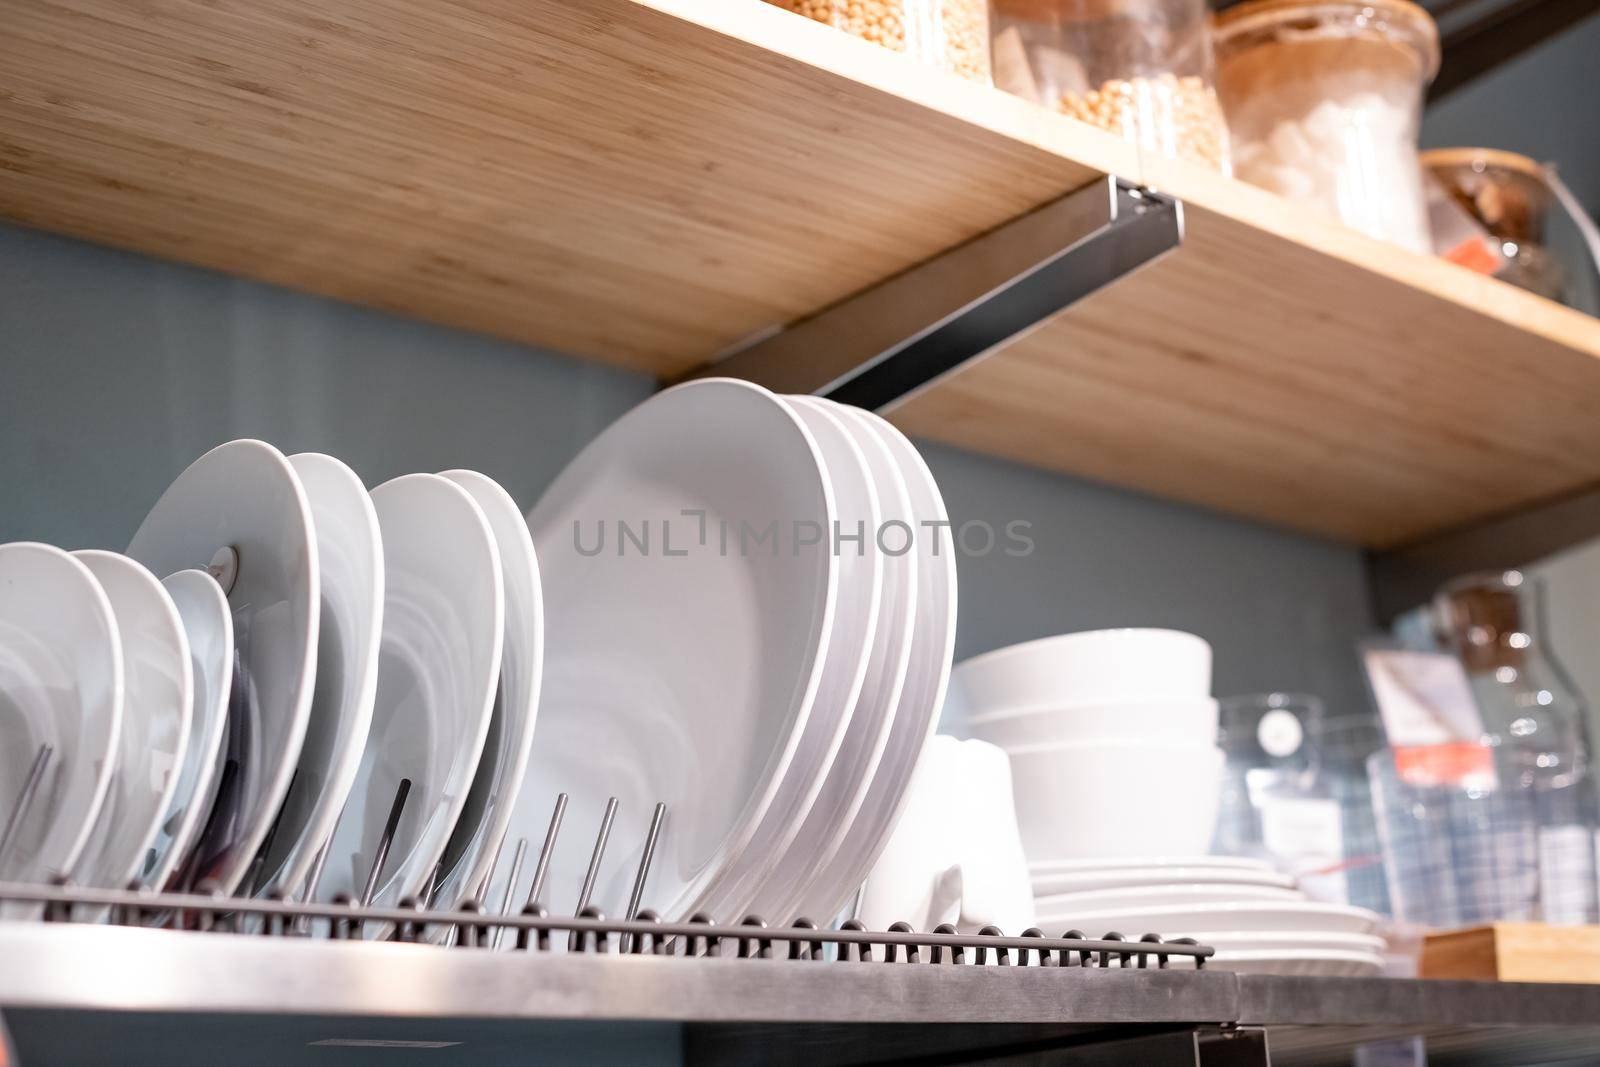 Stand for plates in the kitchen, new design.